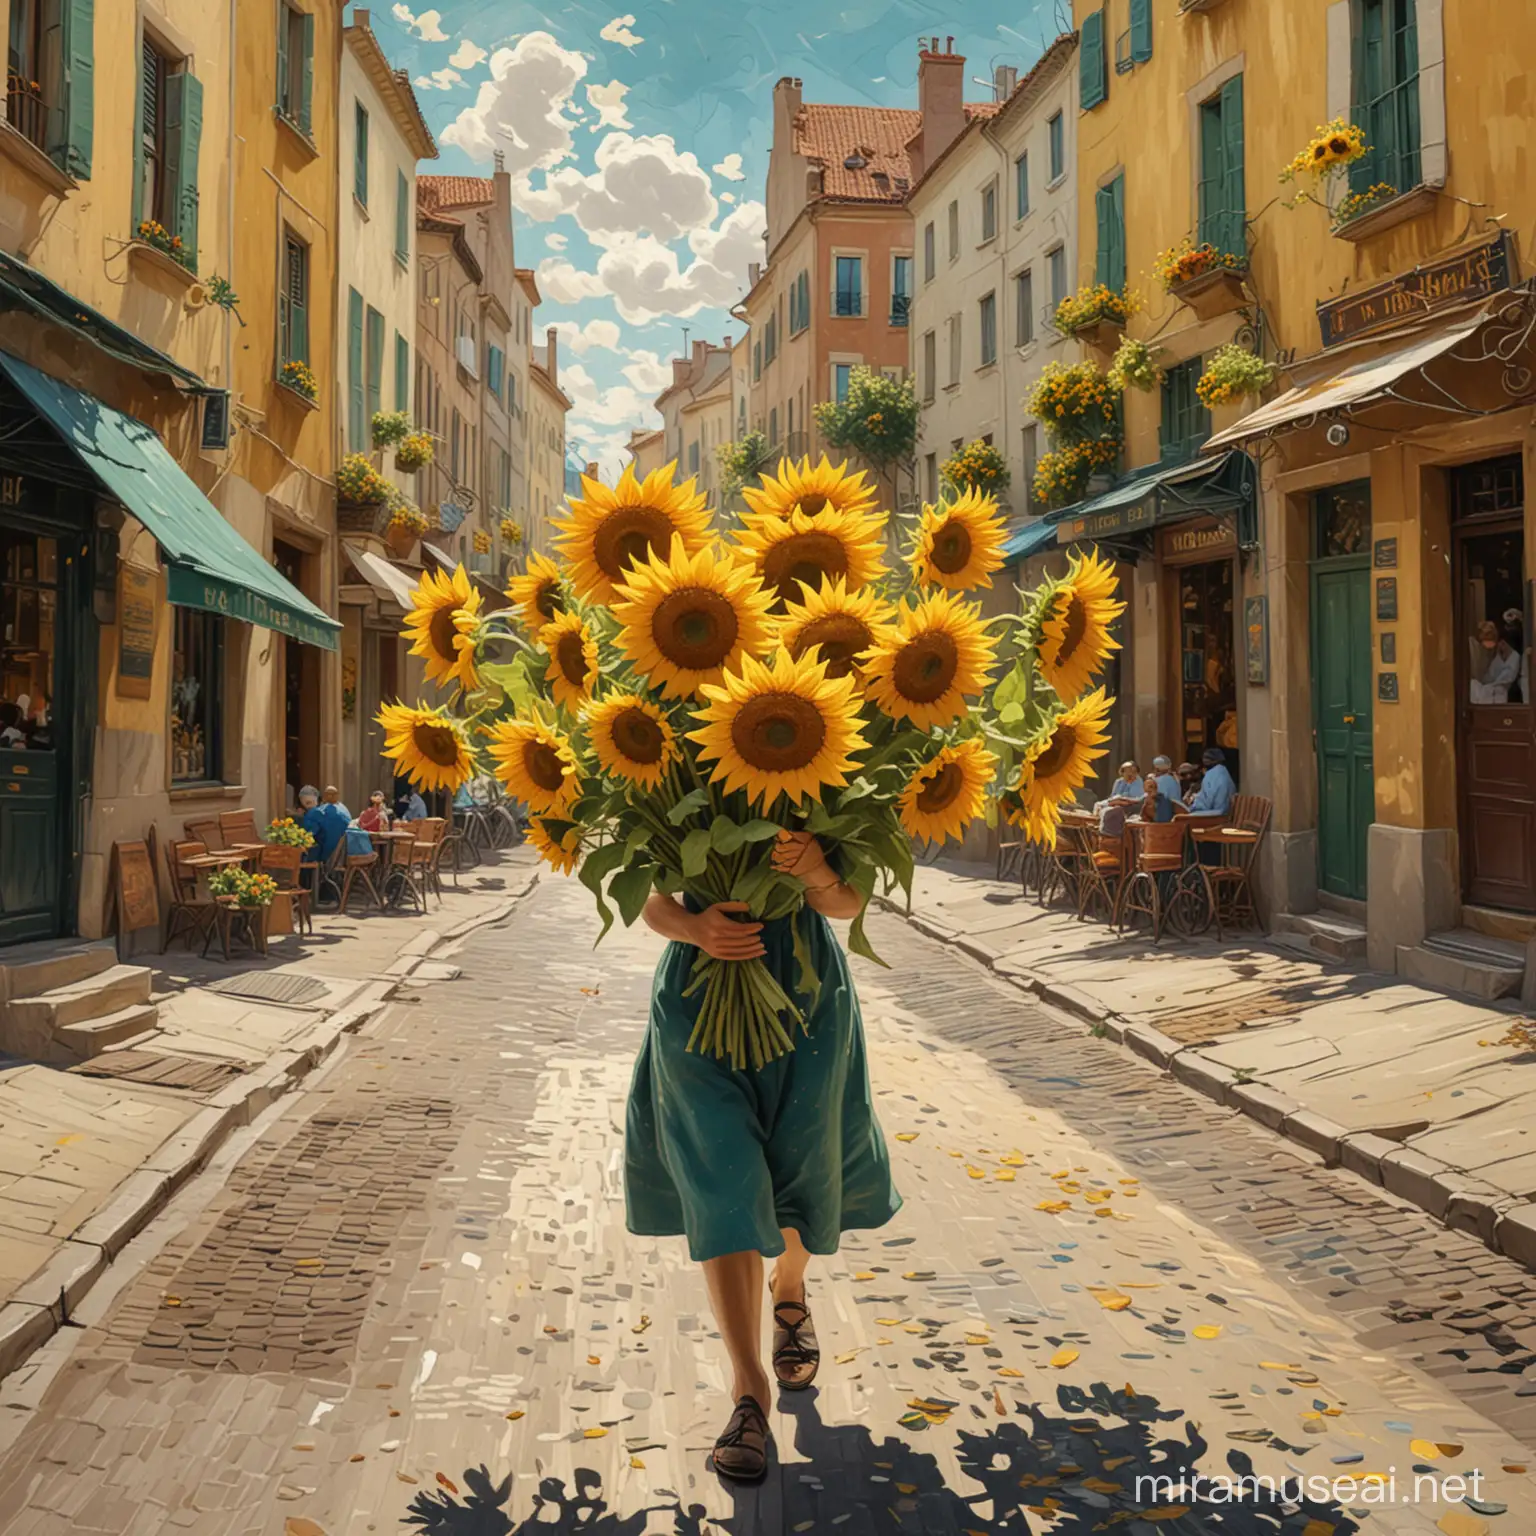 Van Gogh Style Sunflowers in Air with Strolling Painter